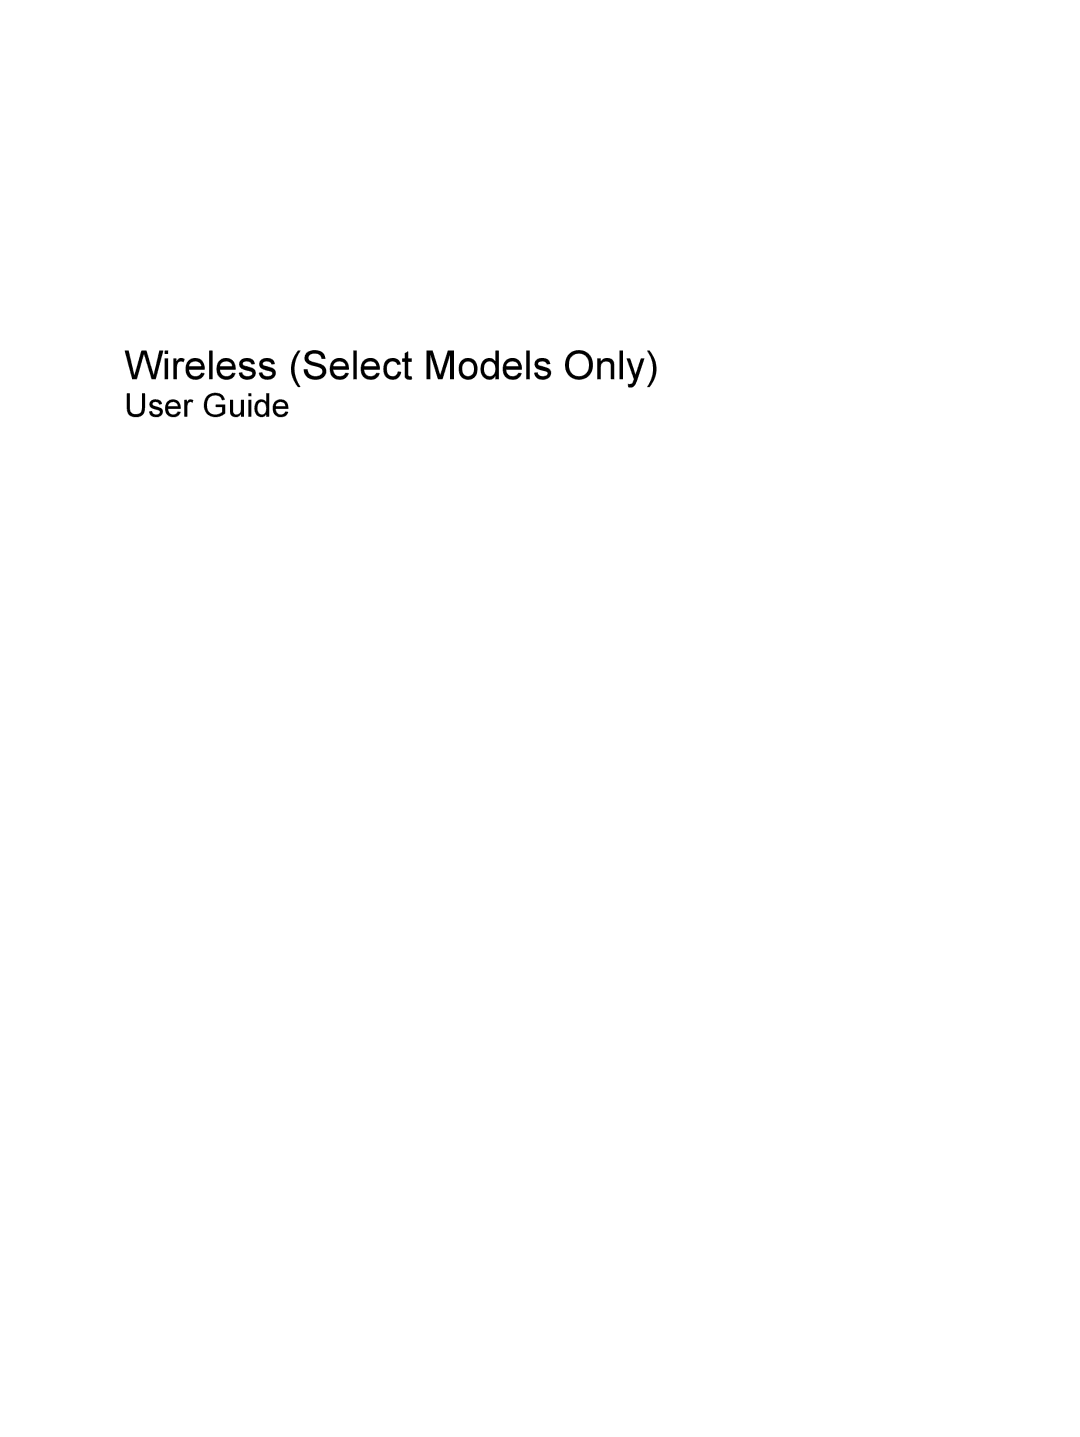 HP CQ35-226TX, CQ35-229TX, CQ35-227TX, CQ35-224TX, CQ35-221TU, CQ35-207TU, CQ35-213TX manual Wireless Select Models Only 